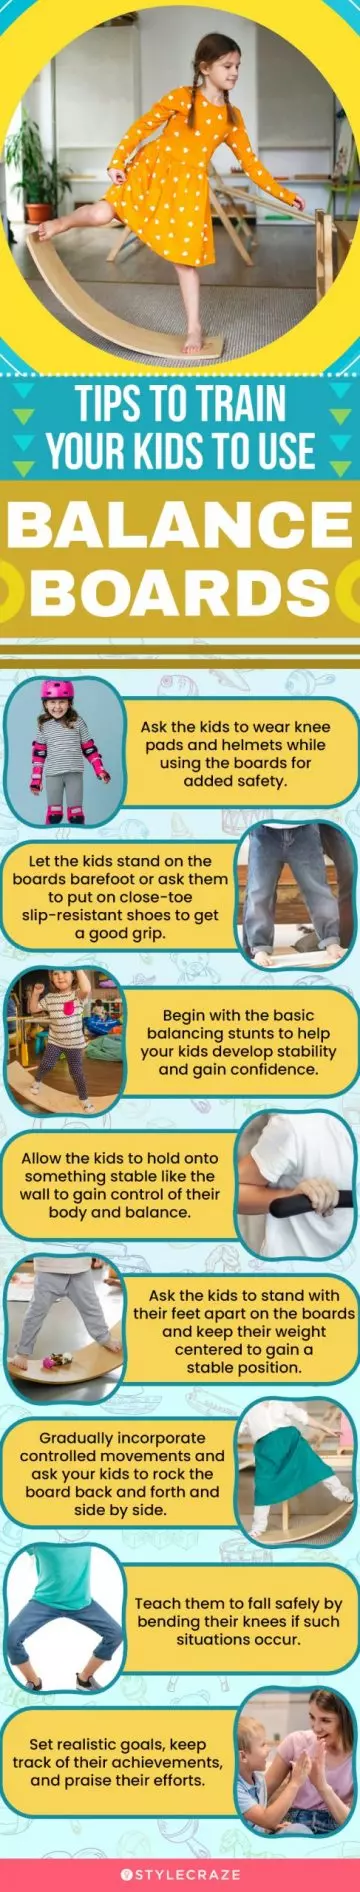 Tips To Train Your Kids To Use Balance Boards(infographic)